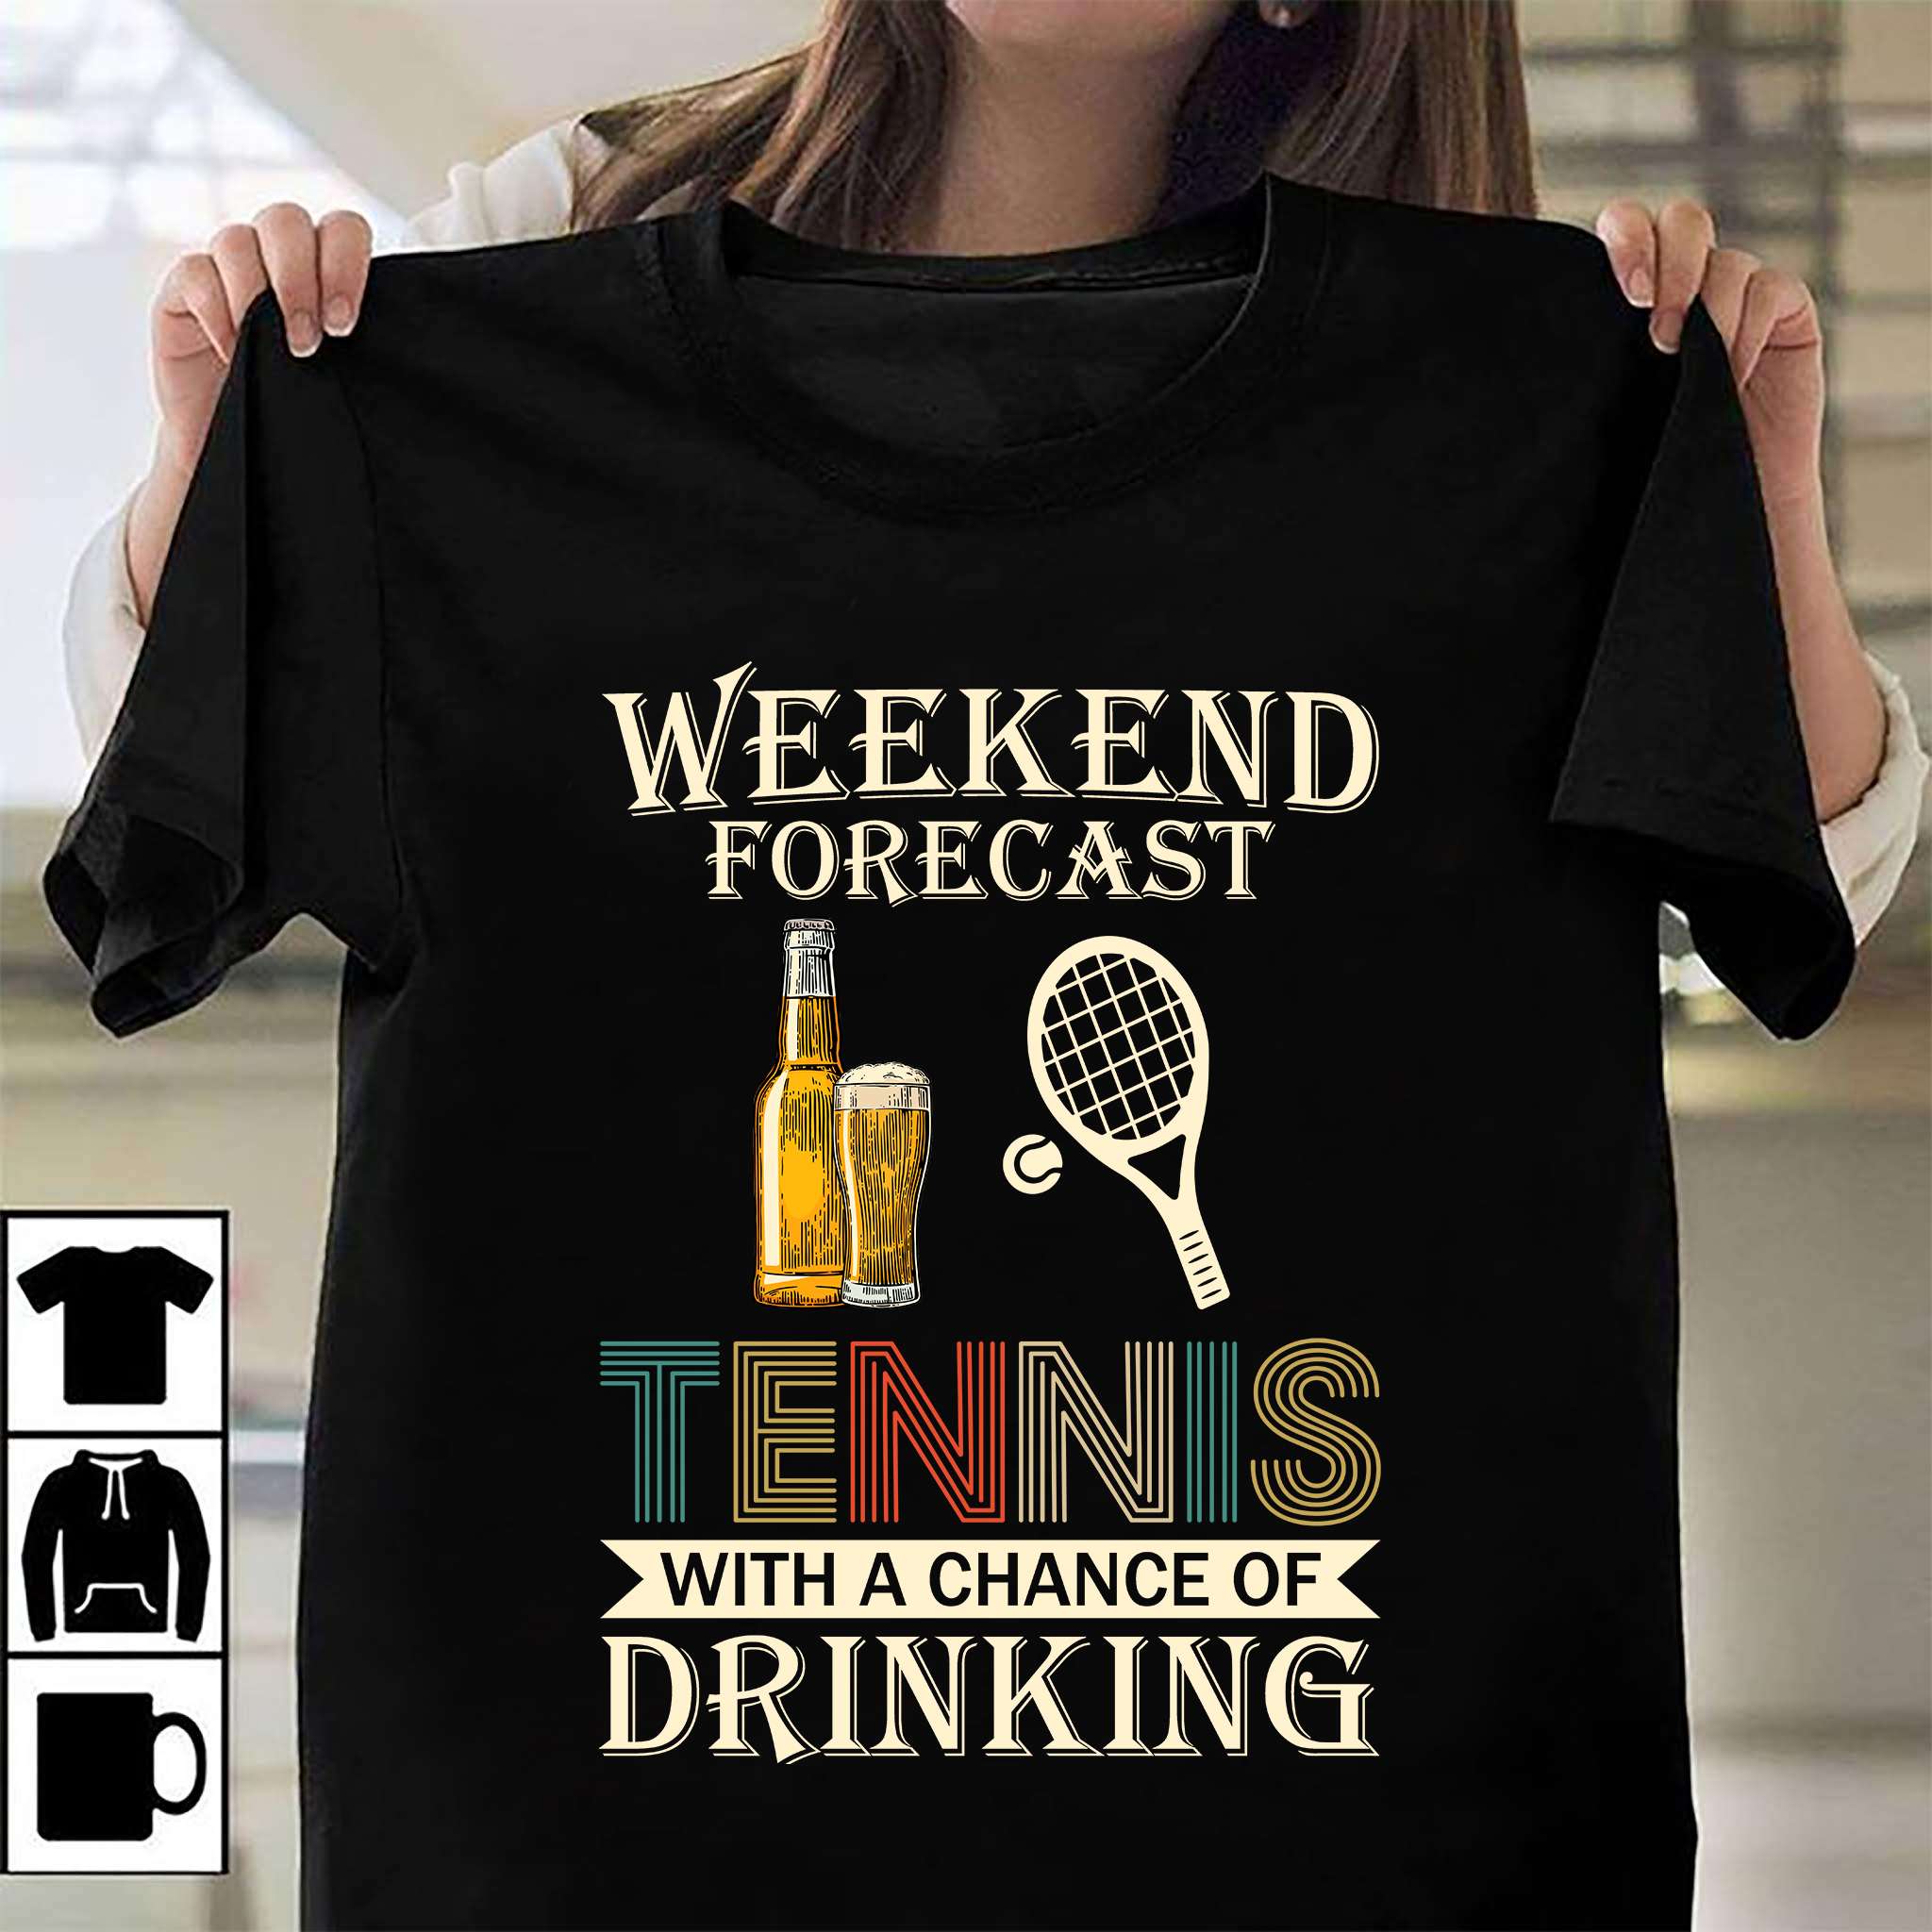 Weekend forecast tennis with a chance of drinking - Tennis racket and beer, love playing tennis